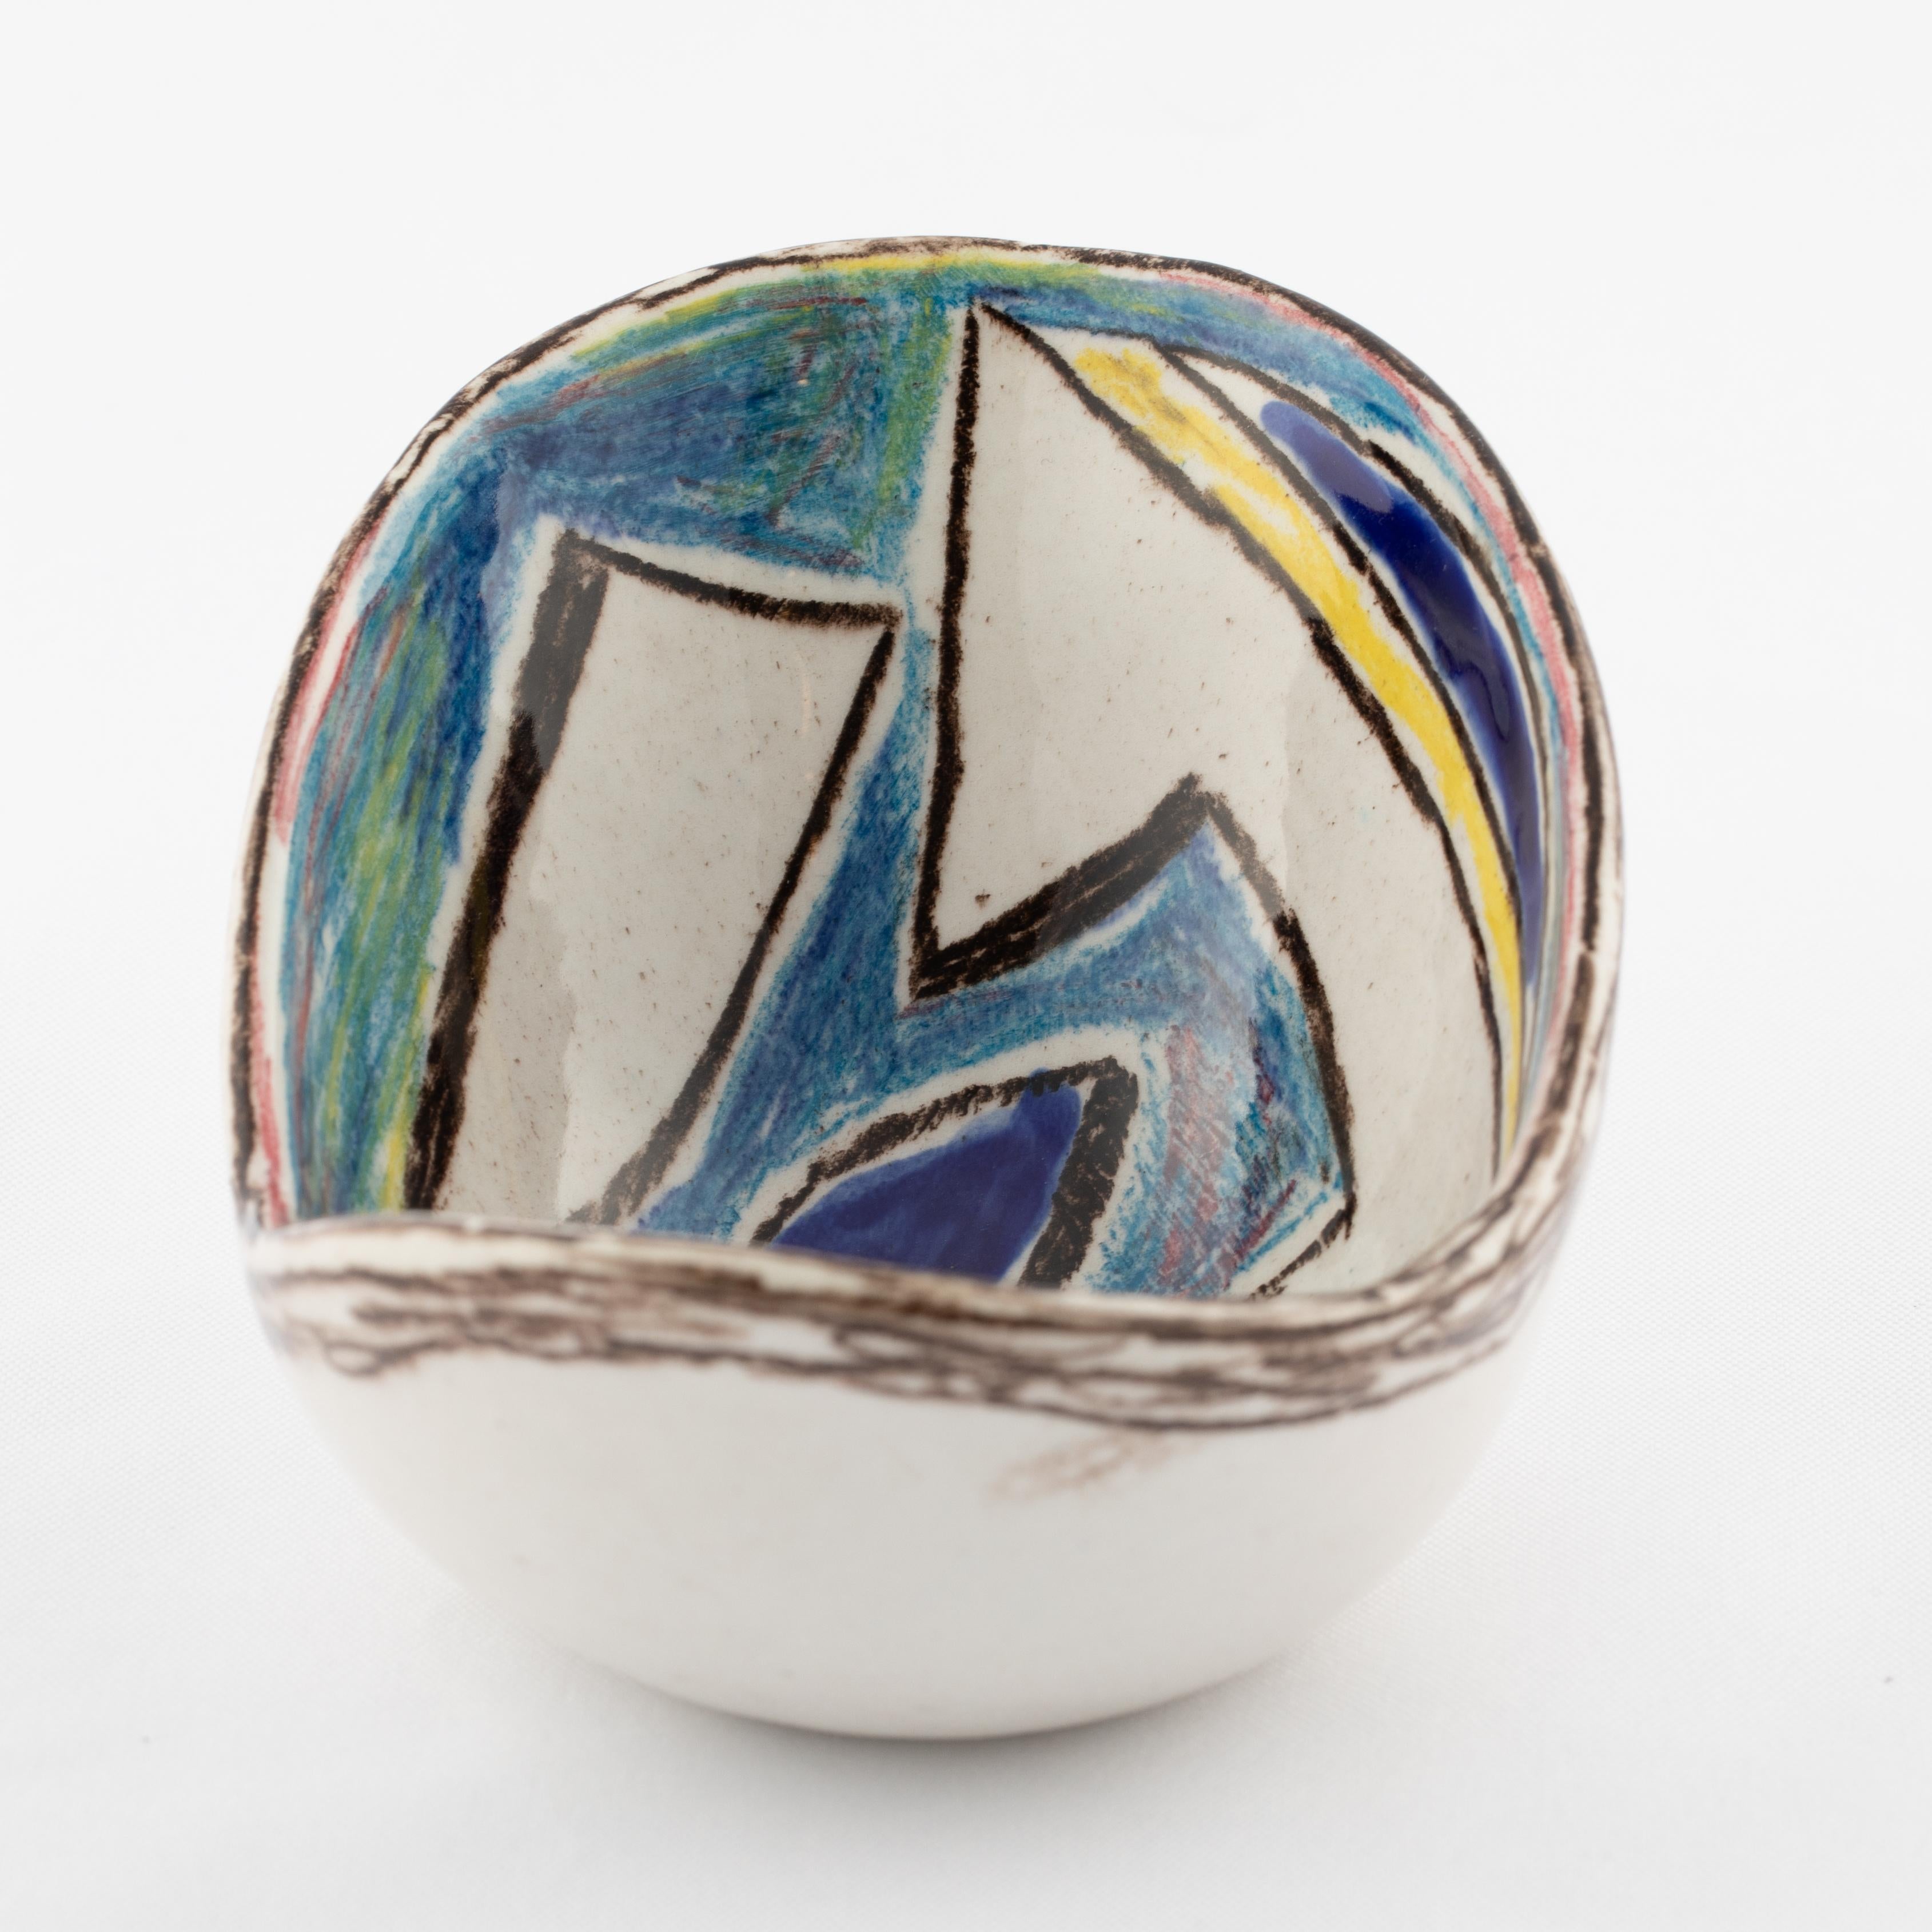 Lovely ceramic bowl with a hand painted abstract glaze design by artist Marcello Fantoni. Partial signature to the bottom. 

